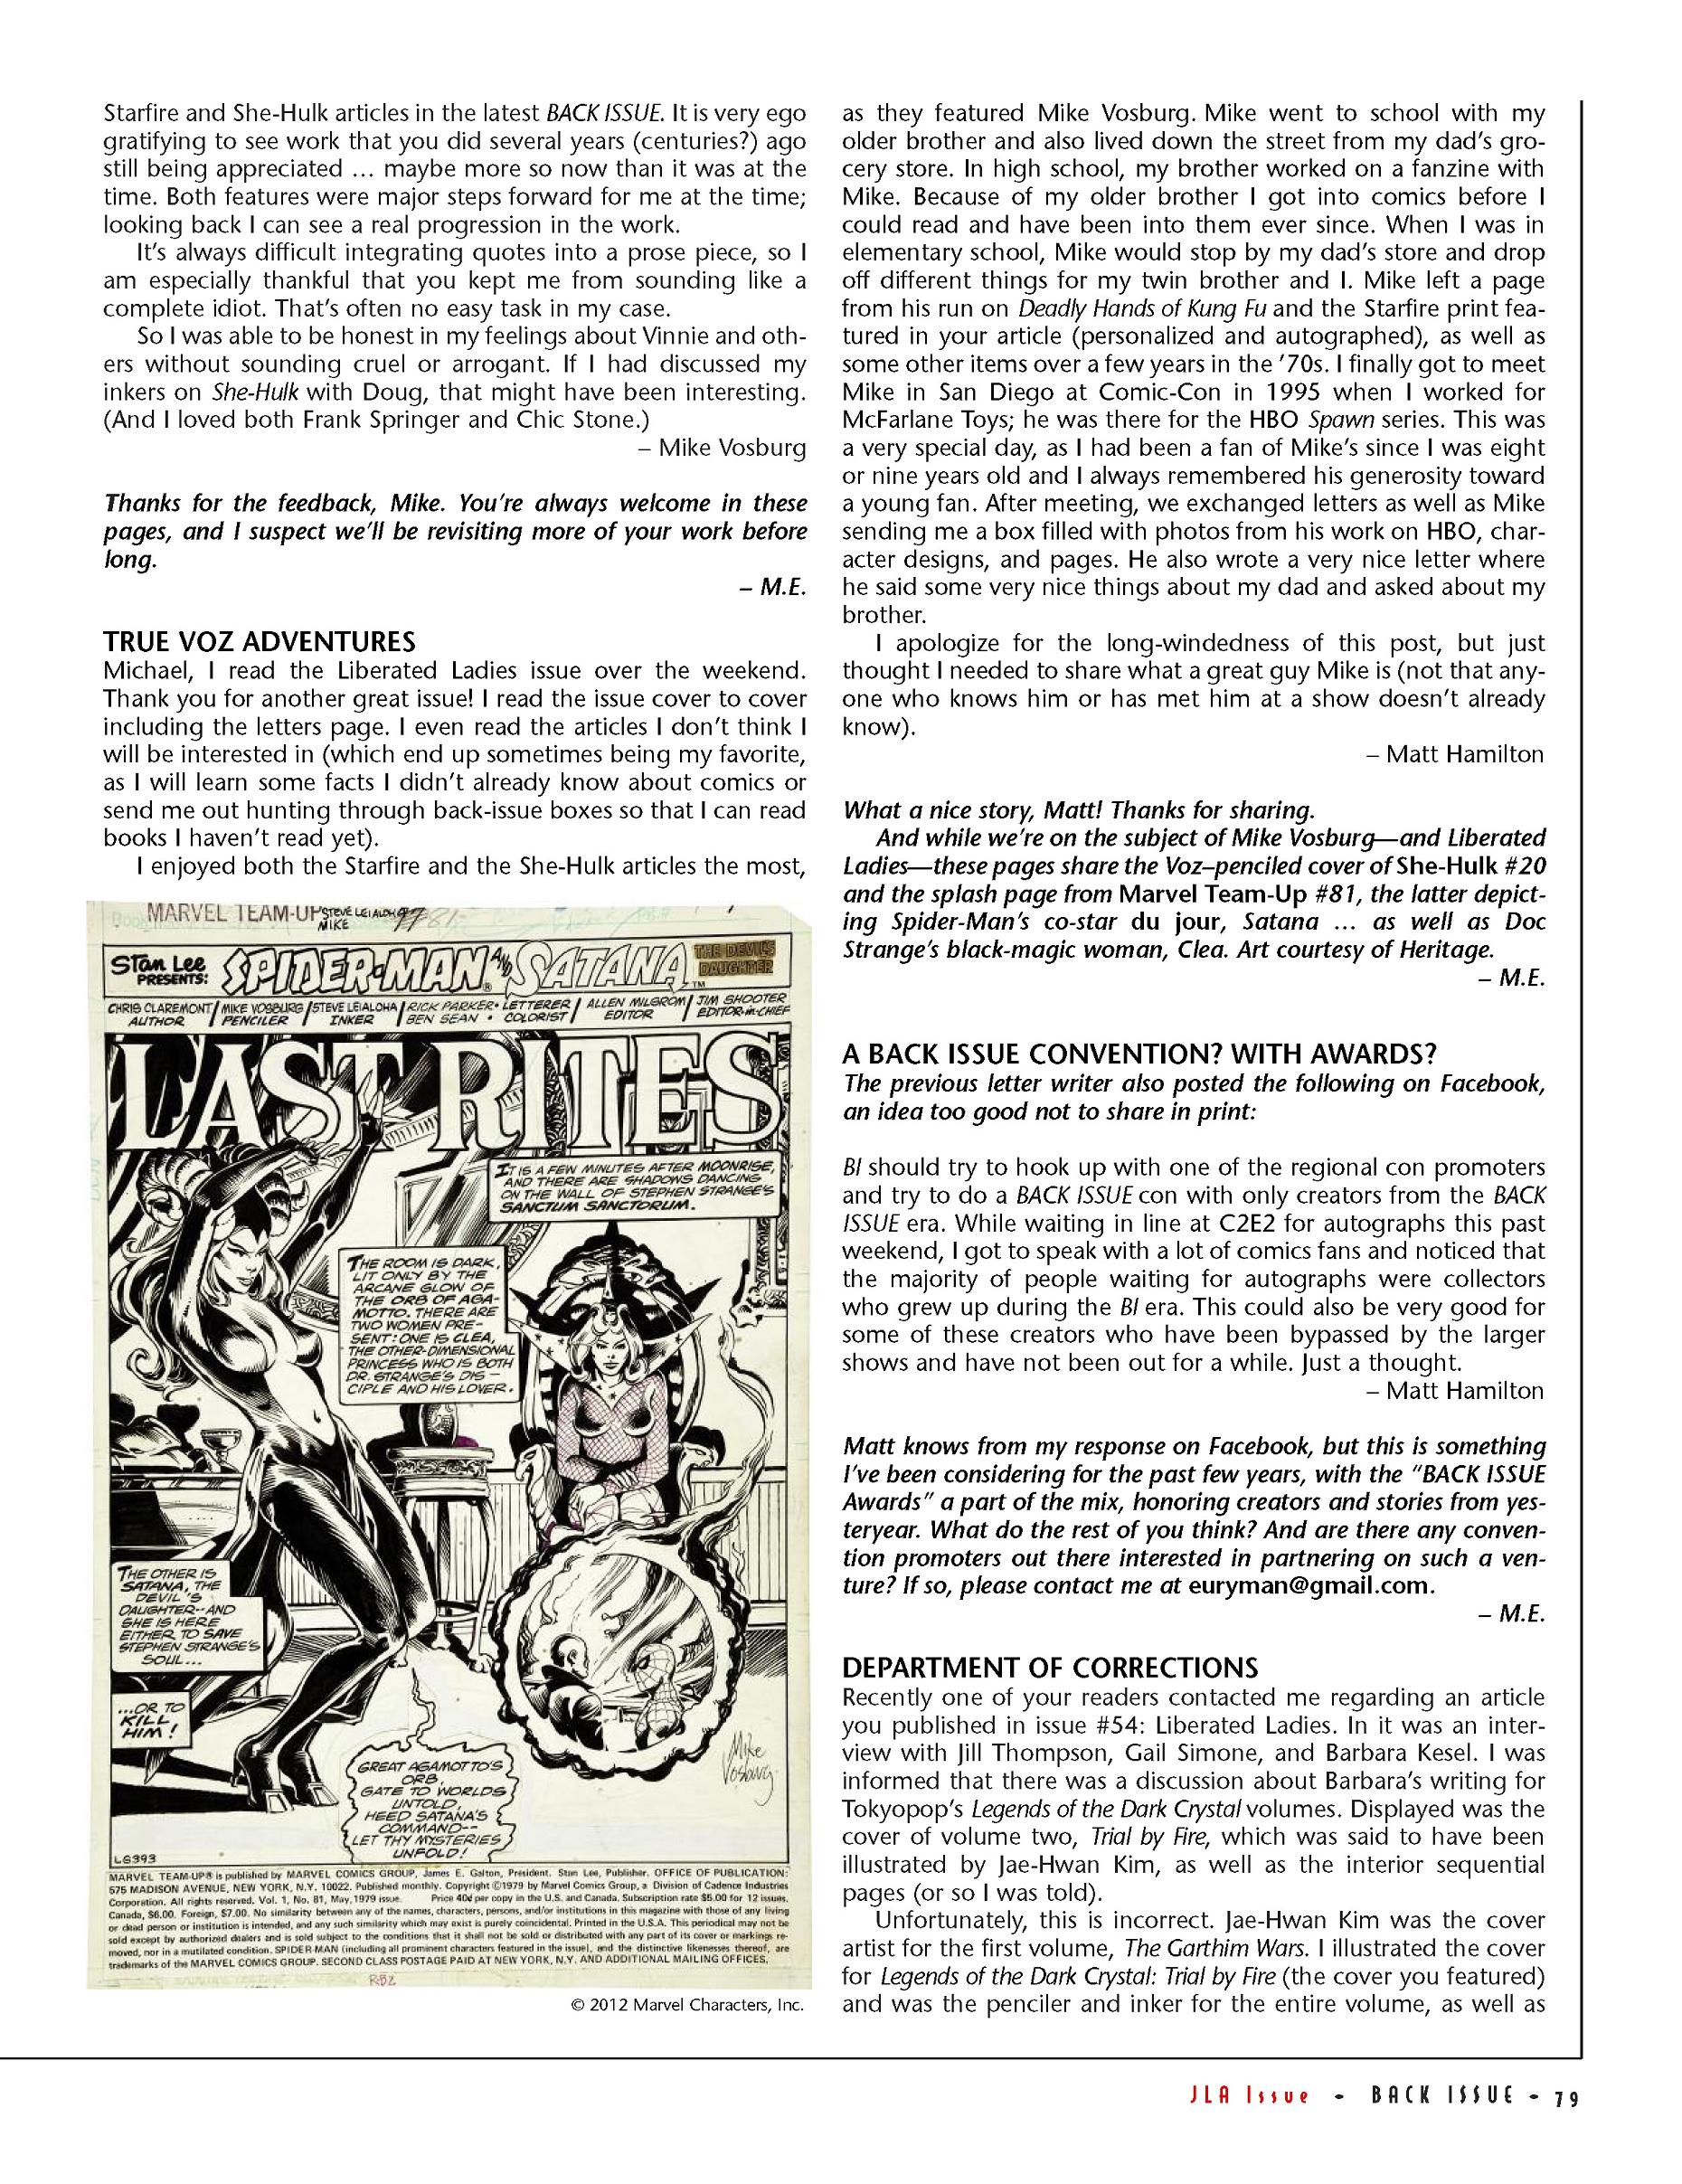 Read online Back Issue comic -  Issue #58 - 79